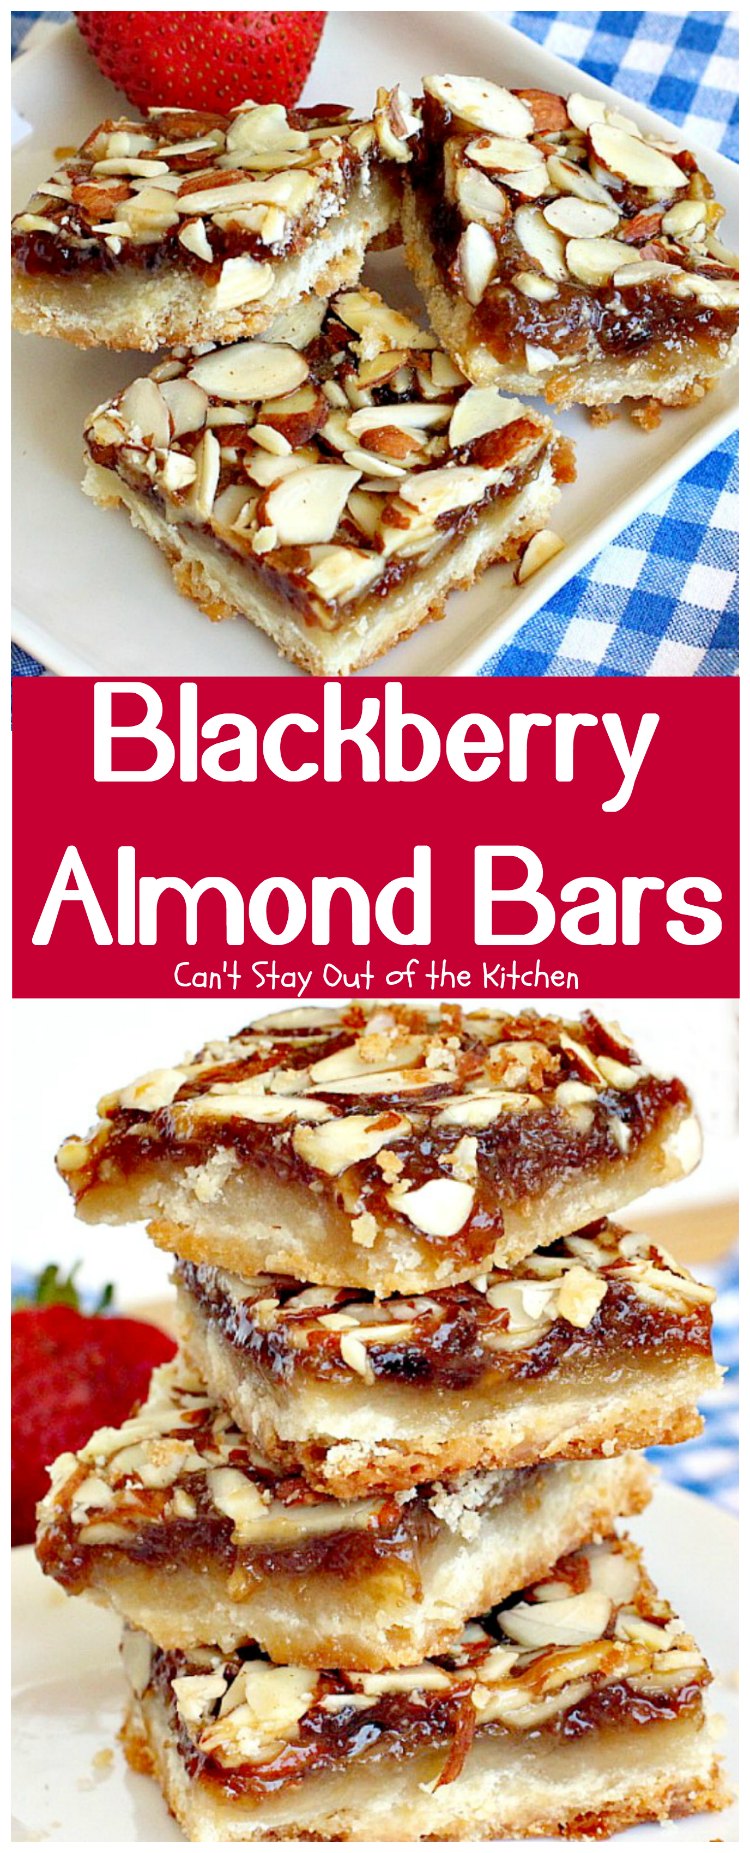 Blackberry Almond Bars | Can't Stay Out of the Kitchen